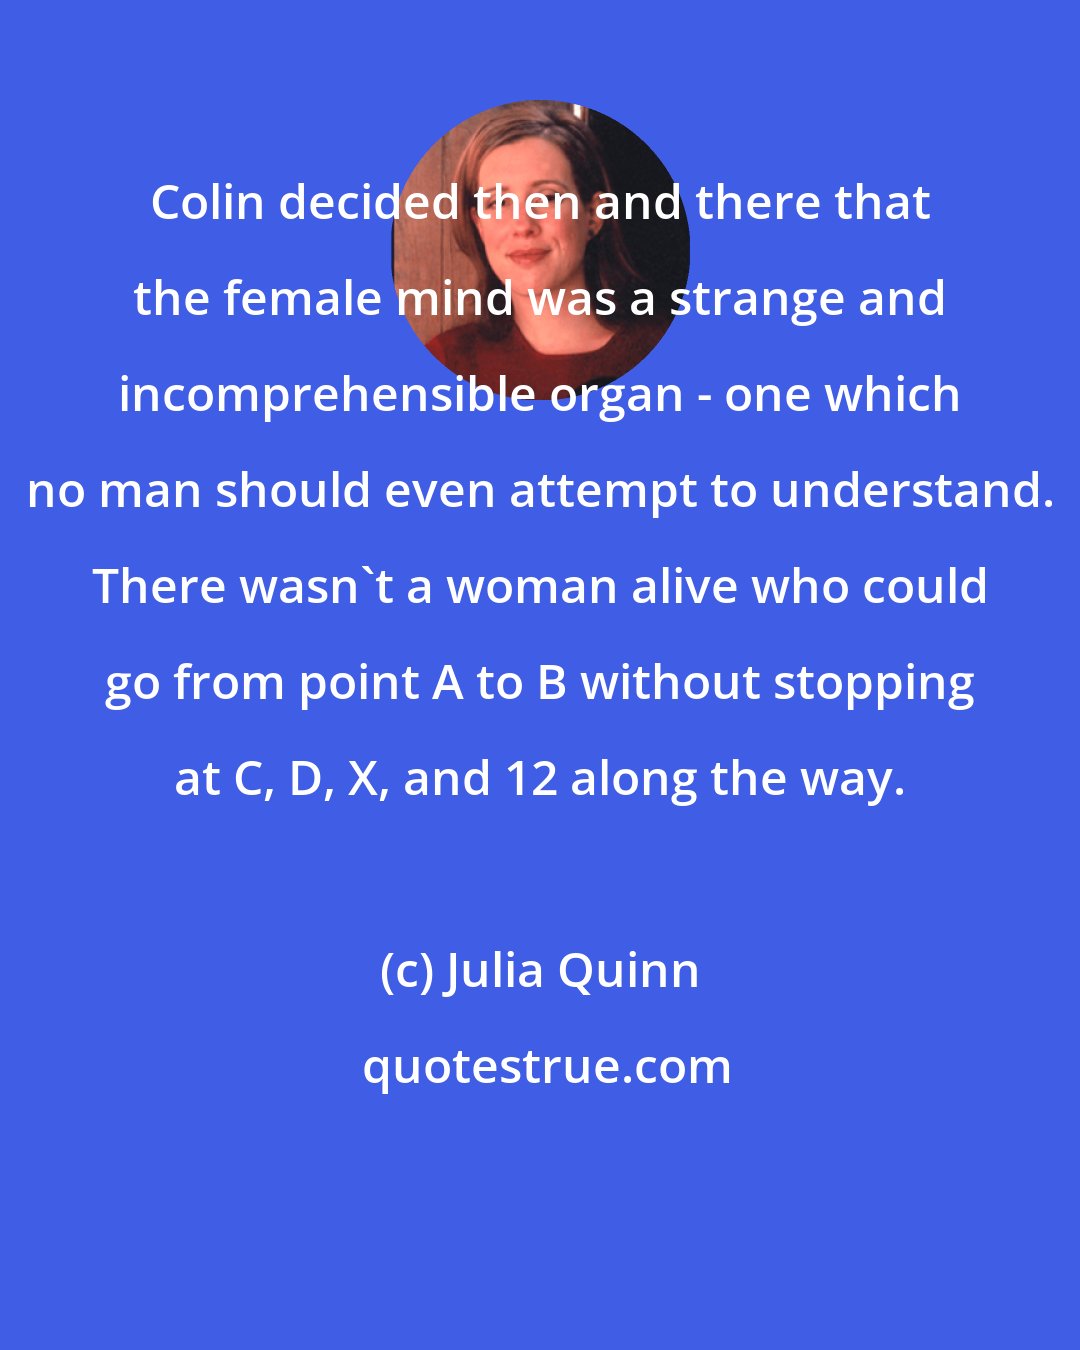 Julia Quinn: Colin decided then and there that the female mind was a strange and incomprehensible organ - one which no man should even attempt to understand. There wasn't a woman alive who could go from point A to B without stopping at C, D, X, and 12 along the way.